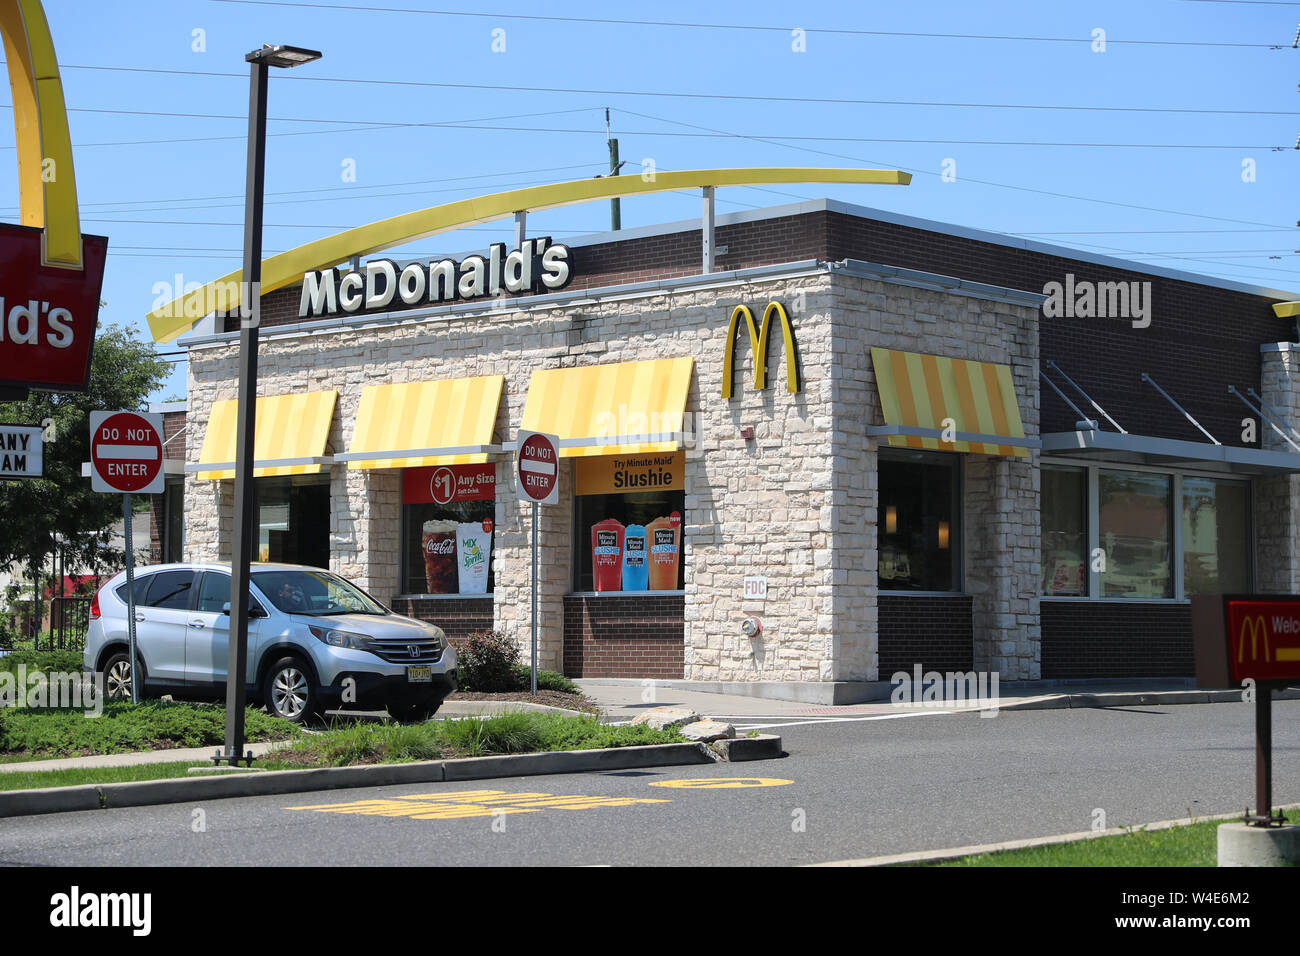 Princeton New Jersey - June 23, 2019: McDonald's fast food restaurant with  drive through and 24 hours service. - Image Stock Photo - Alamy